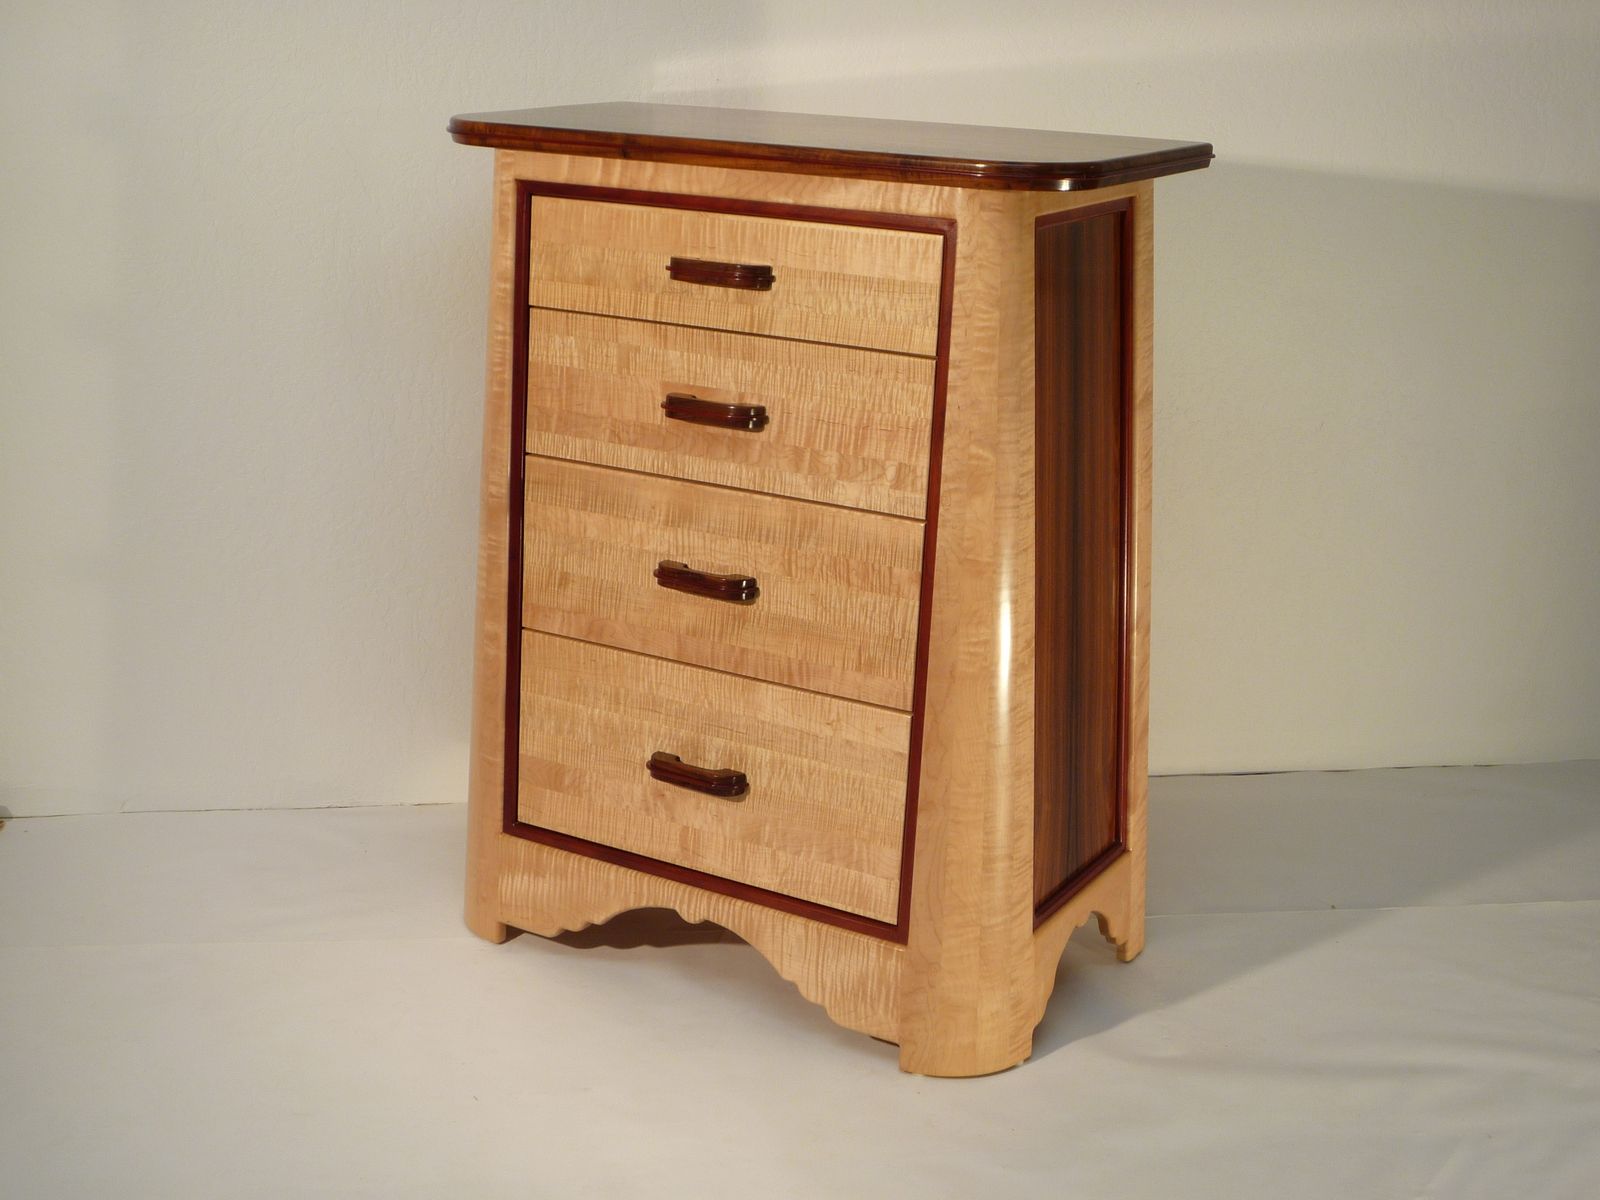 curly maple bedroom furniture